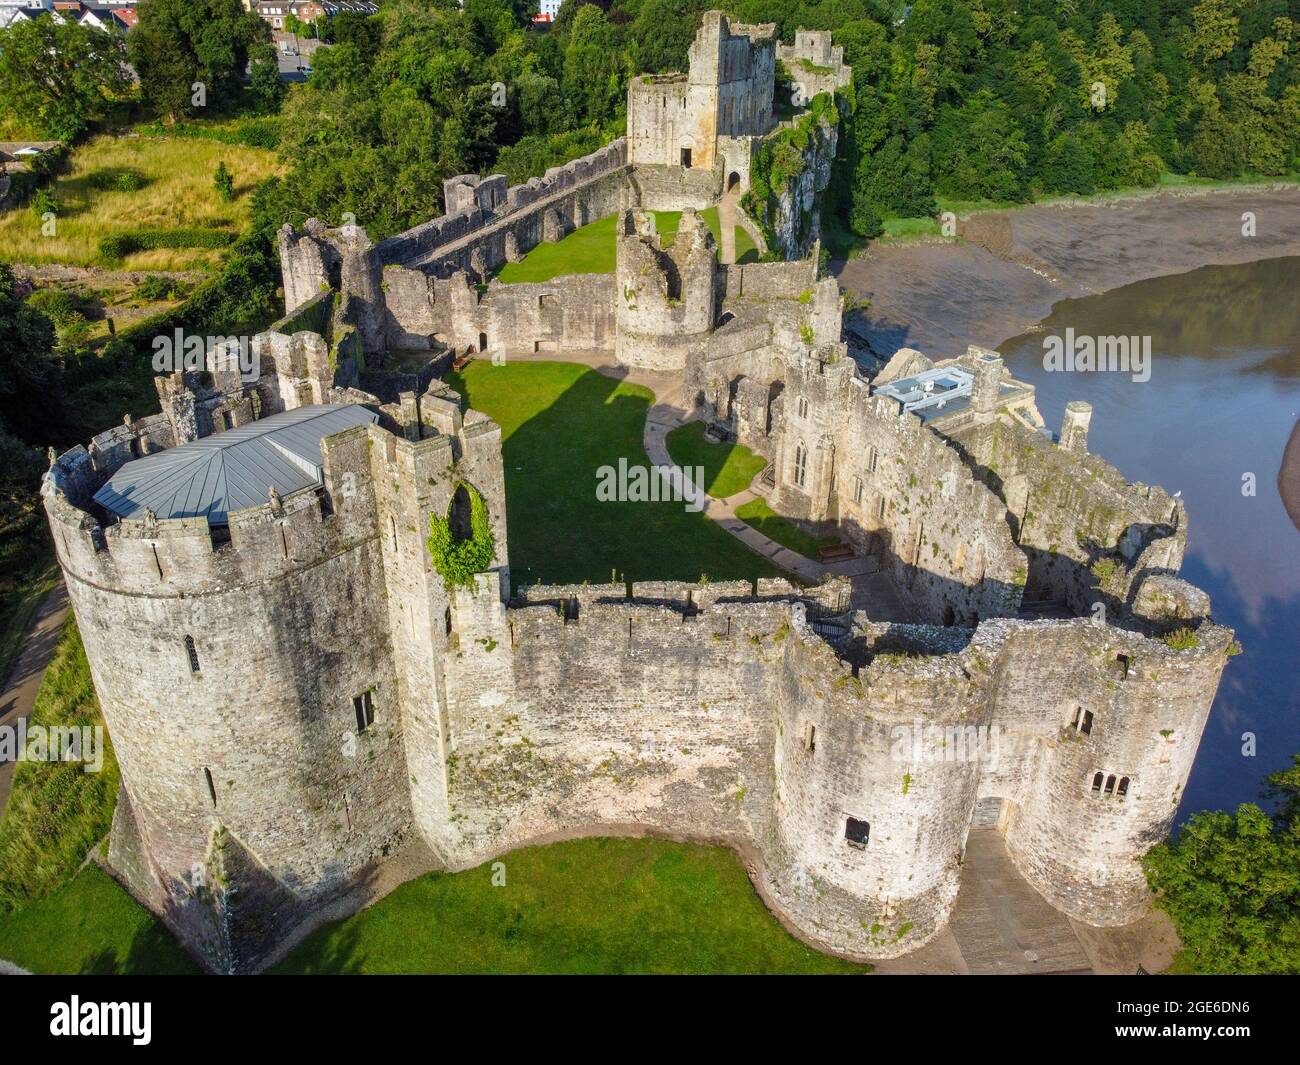 Chepstow's Norman castle in Chepstow, Wales Stock Photo